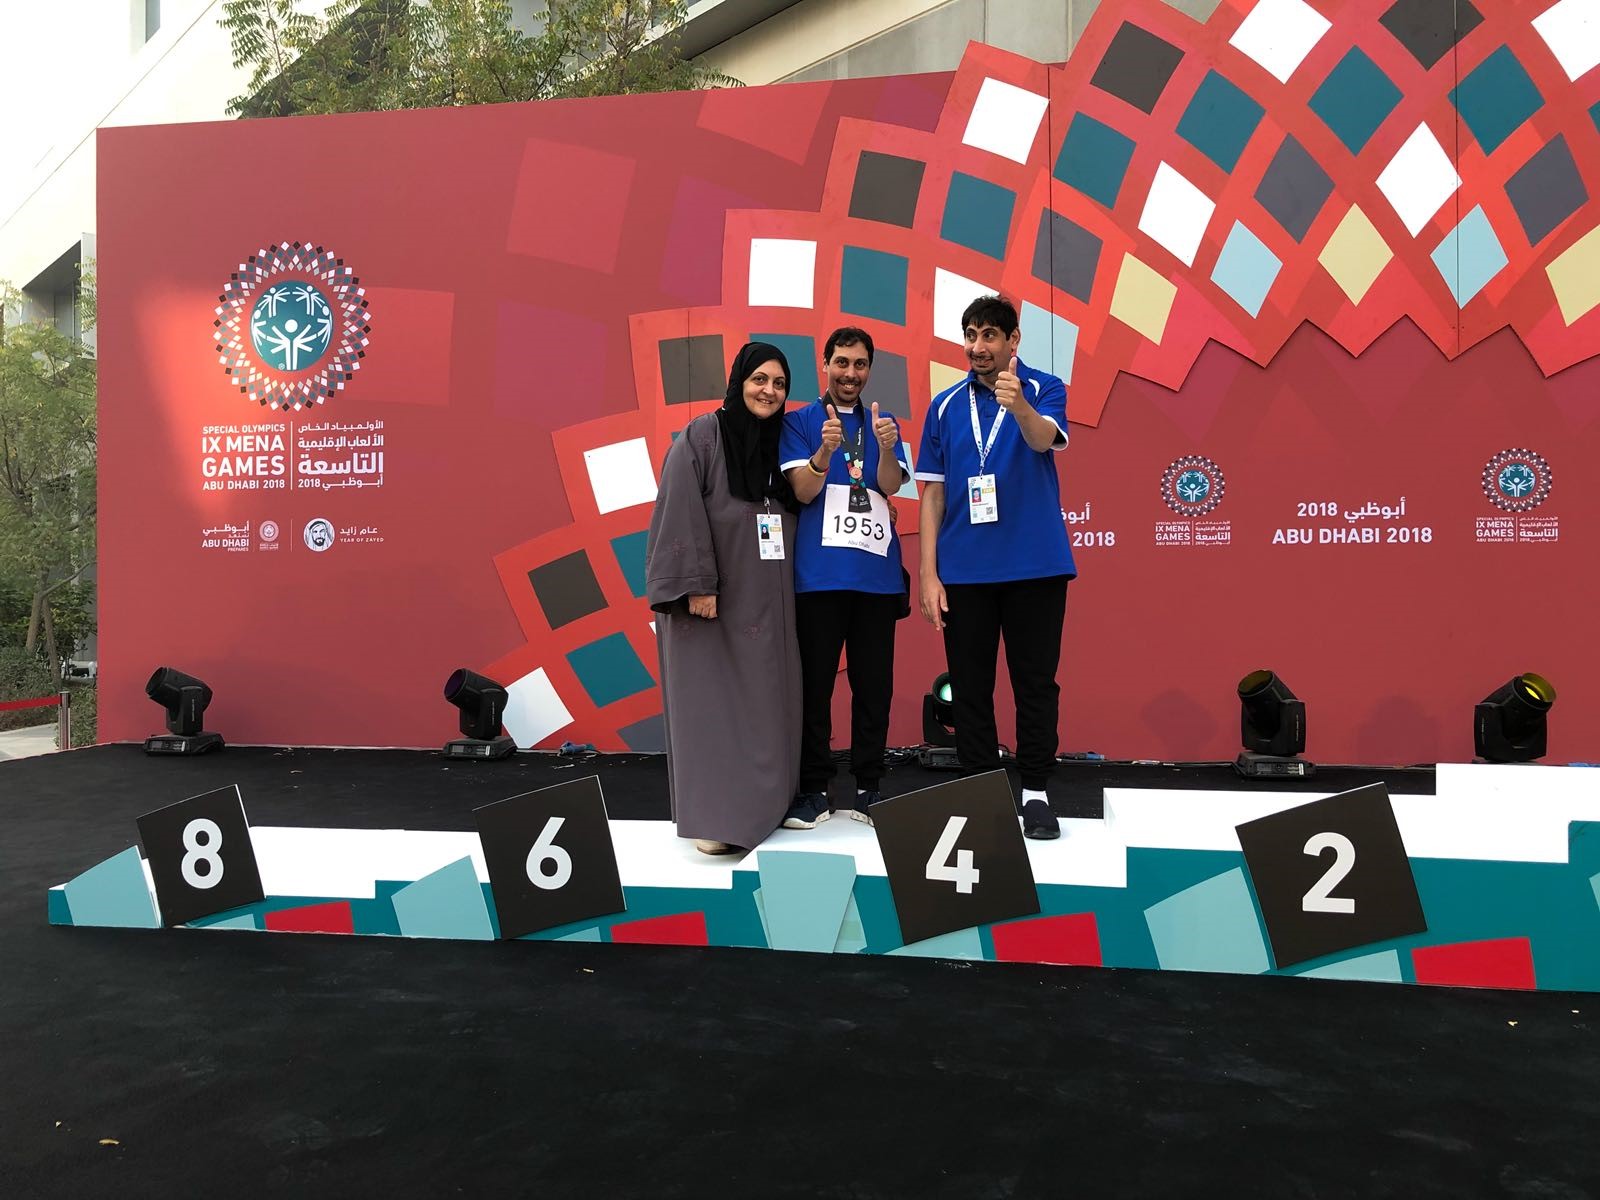 Kuwaiti special athletes with their mother